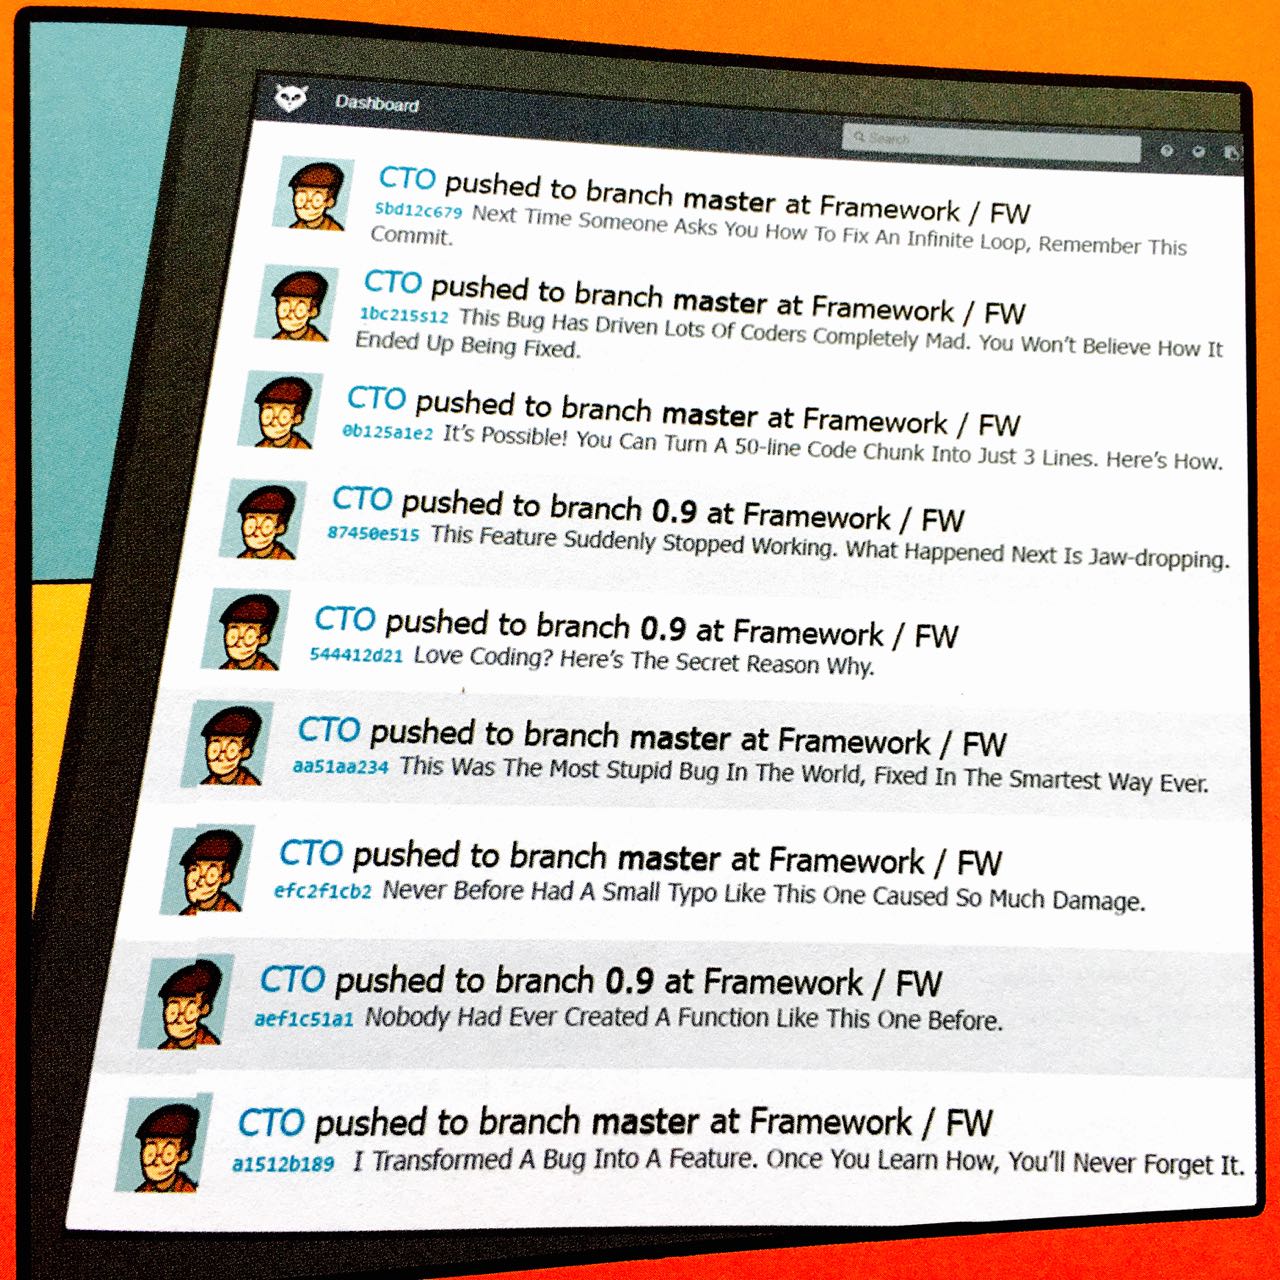 CommitStrip - Rise of the Coders: Review